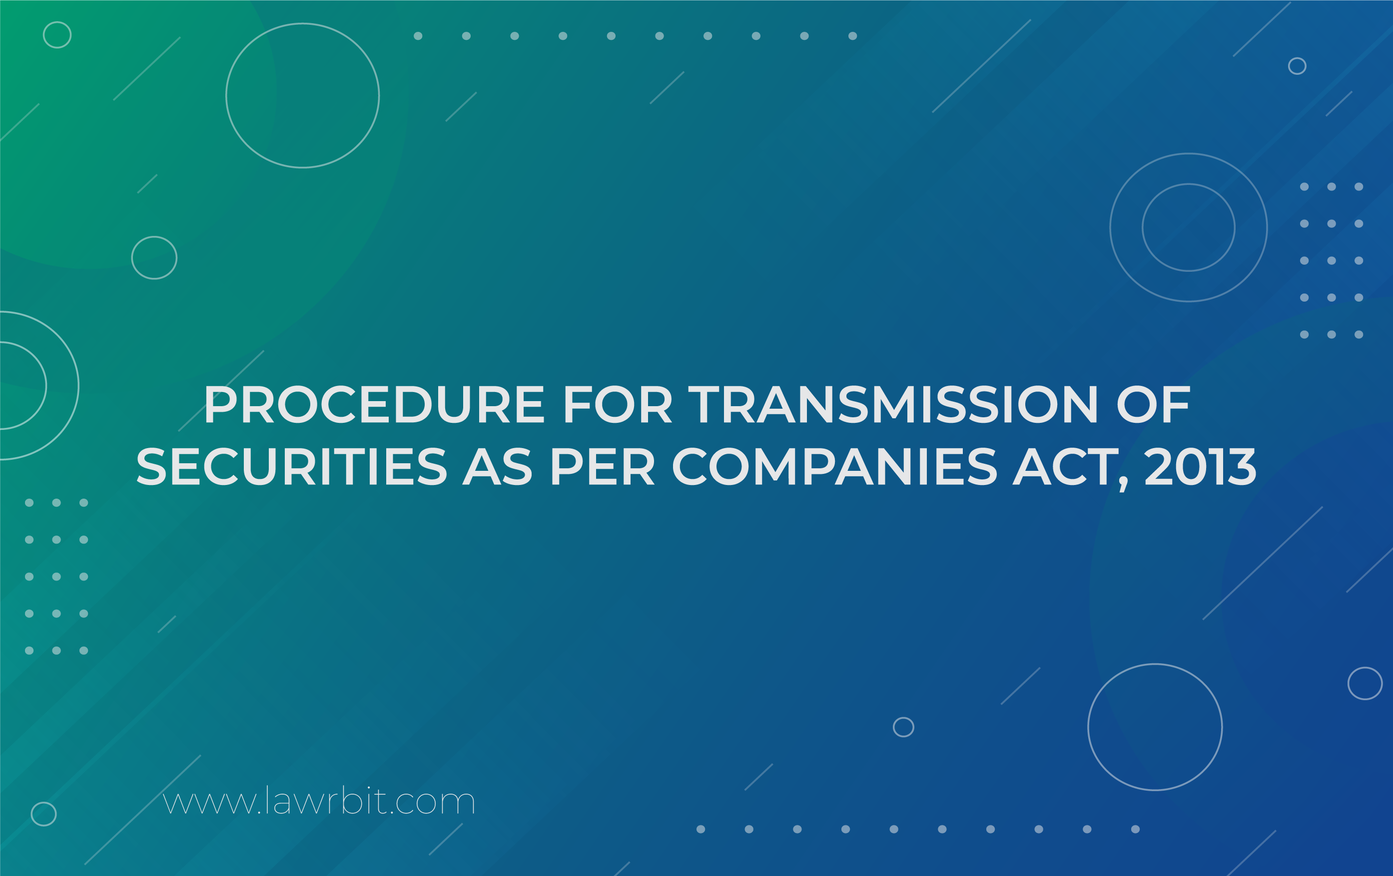 Procedure for Transmission of Securities